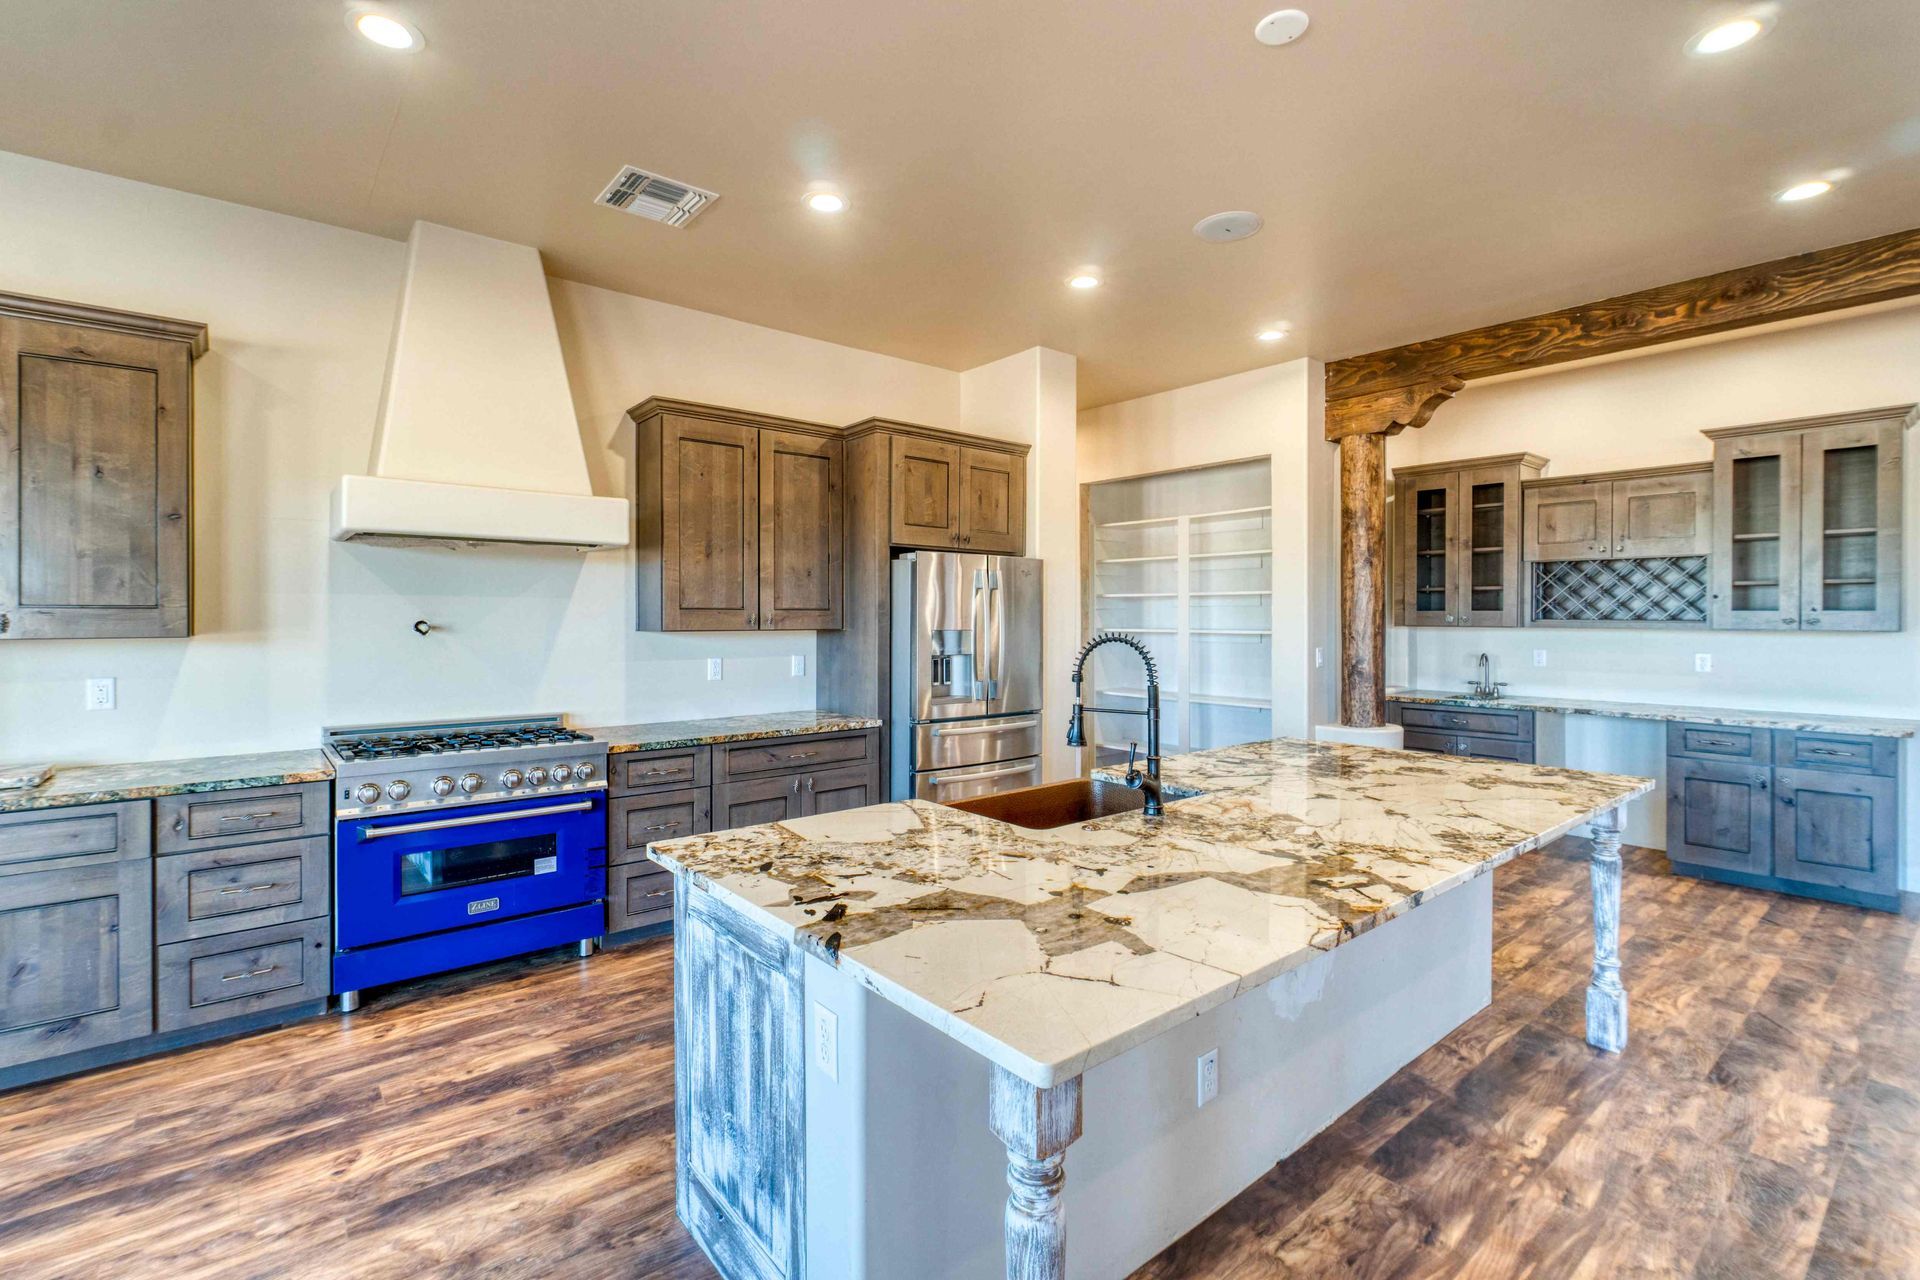 Rustic custom cabinetry for a professional kitchen remodel at a home in the Boulder area